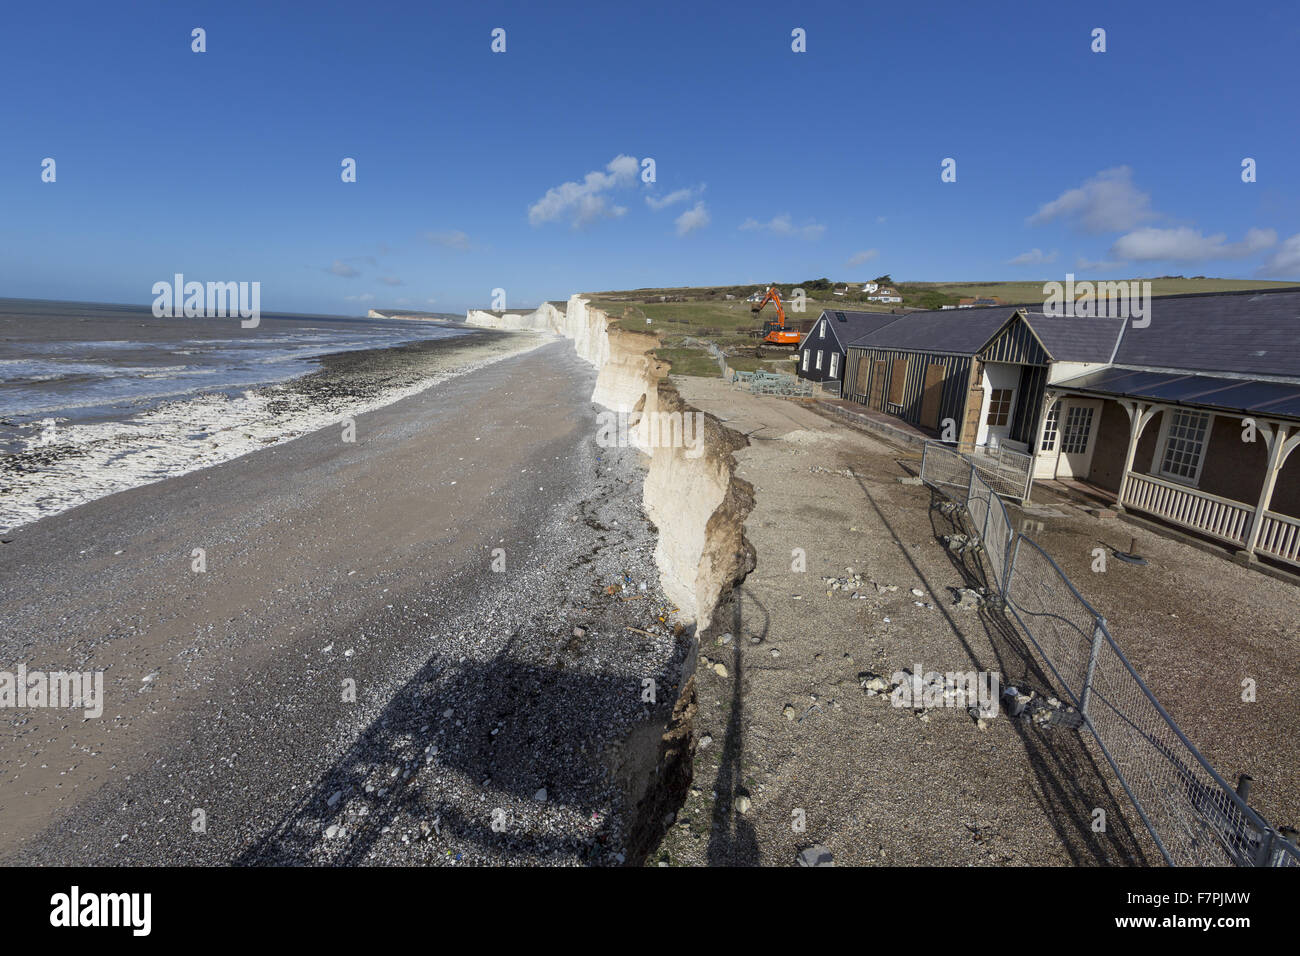 View of the storm-damaged cliffs and beach at Birling Gap, East Sussex, pictured here in February 2014, with demolition work seen taking place on vulnerable clifftop buildings. Extreme weather in January and February of that year resulted in seven years' Stock Photo